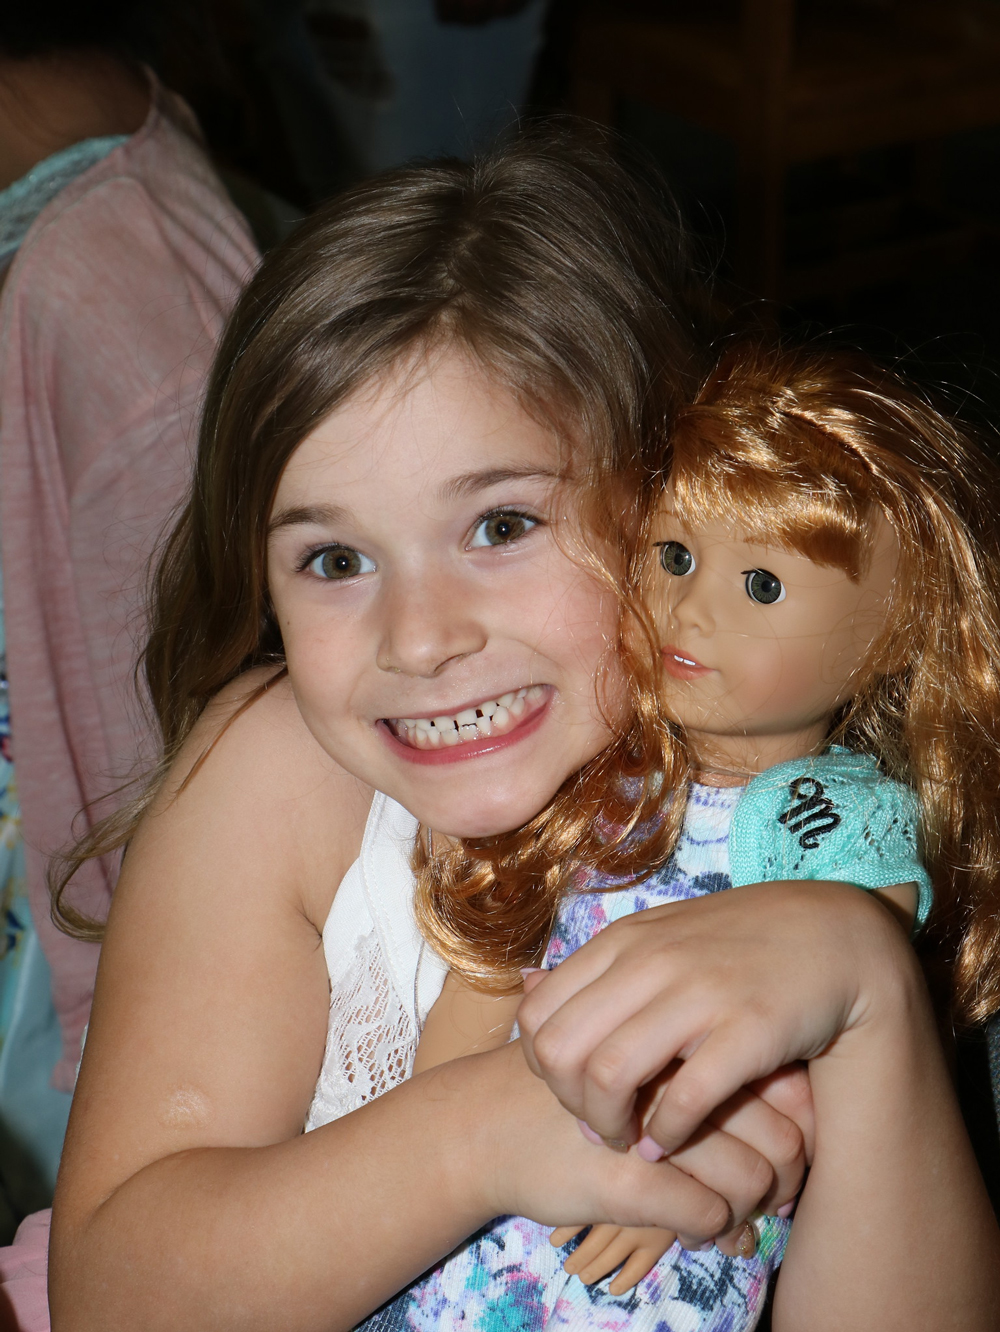 
Nyssa Cain is happy to have a new special doll friend from Dolls4All.
